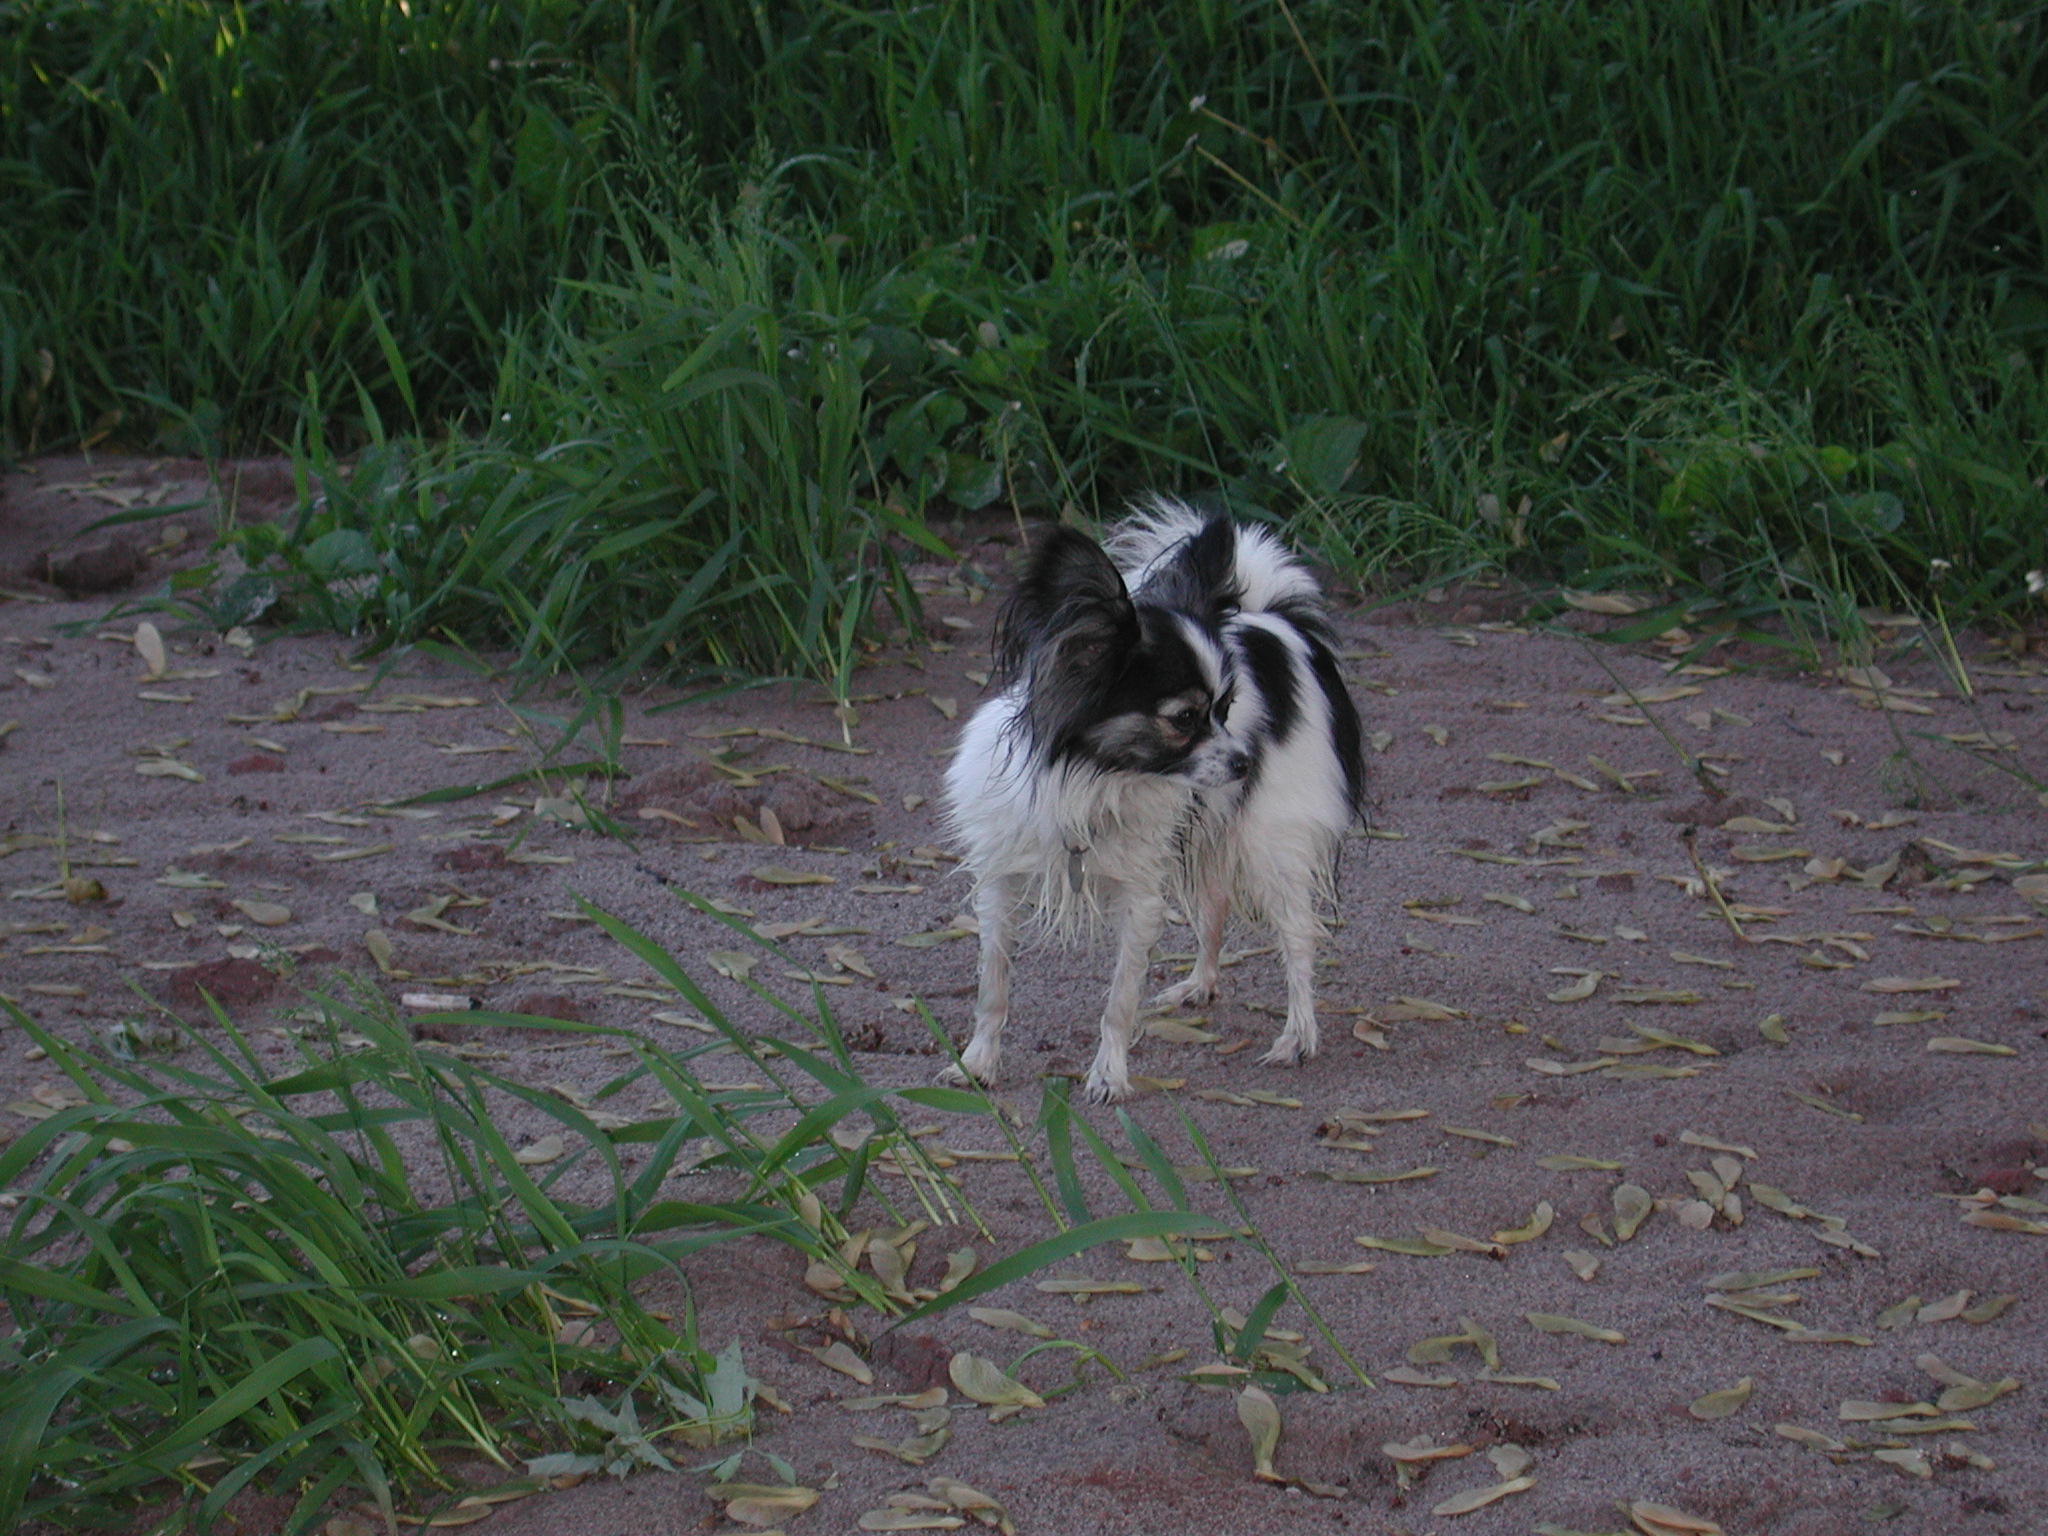 a black and white dog standing in a grassy area